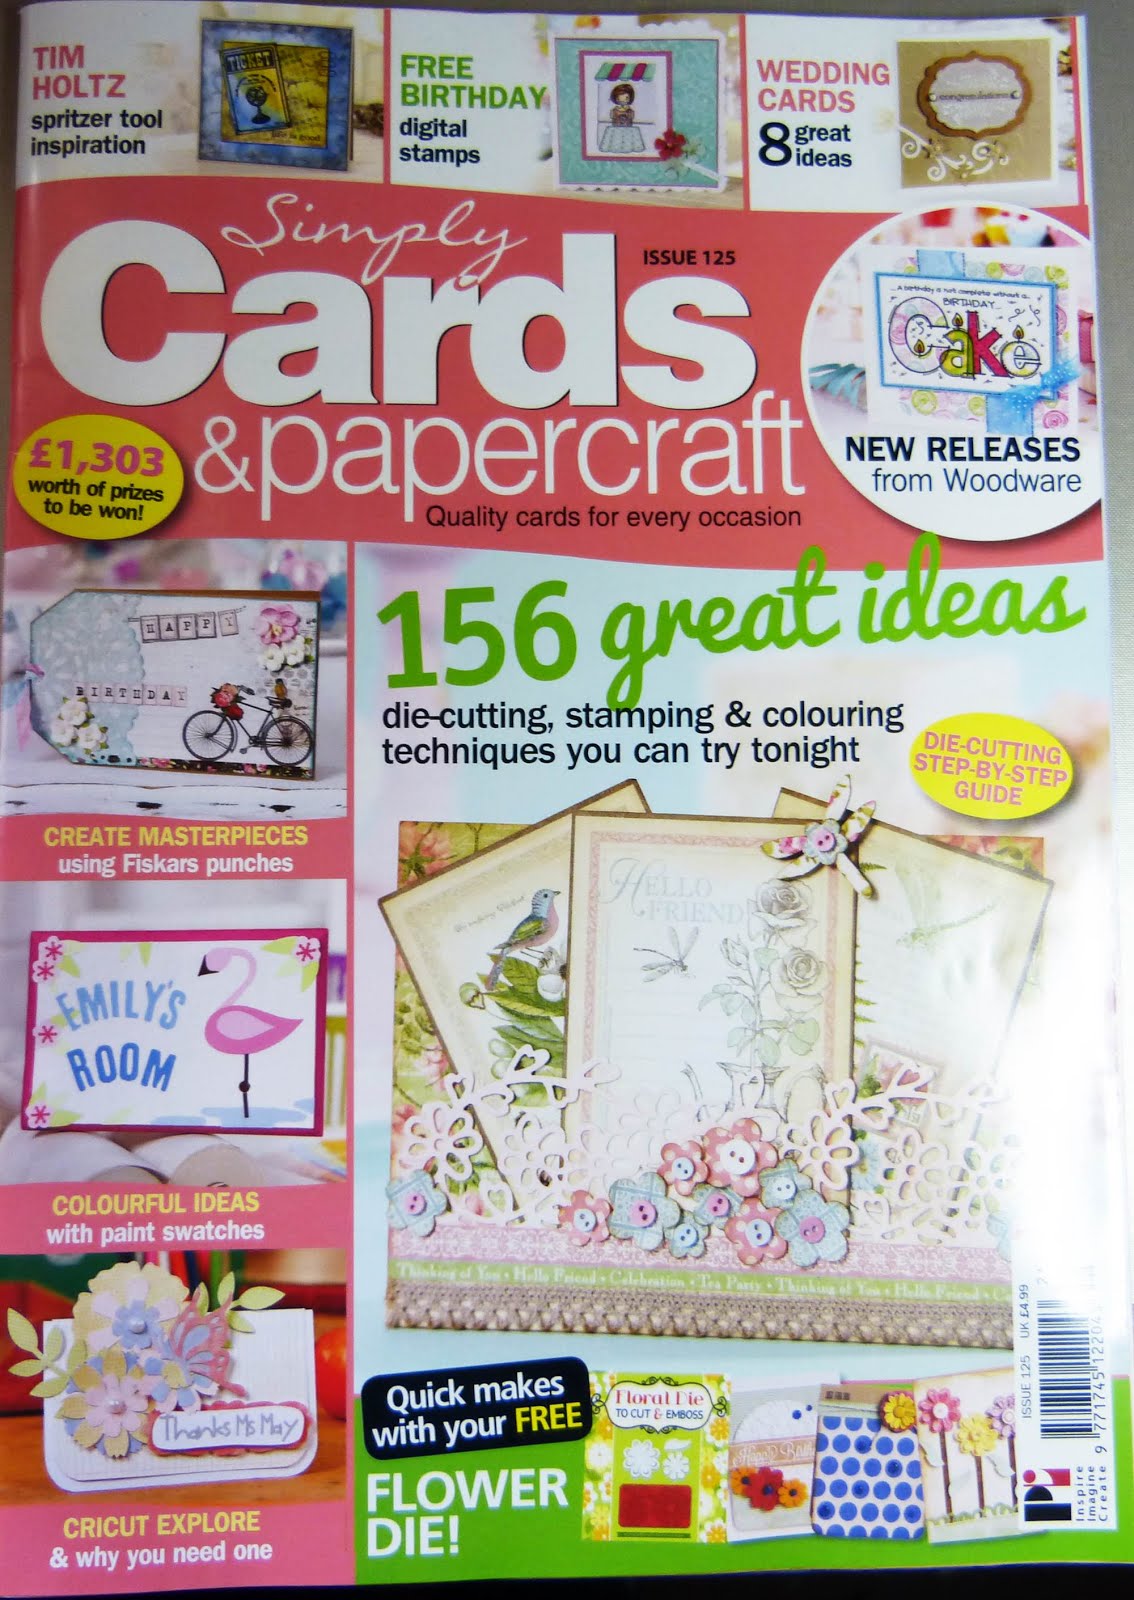 Published in Simply Cards & Papercrafts Issue 125